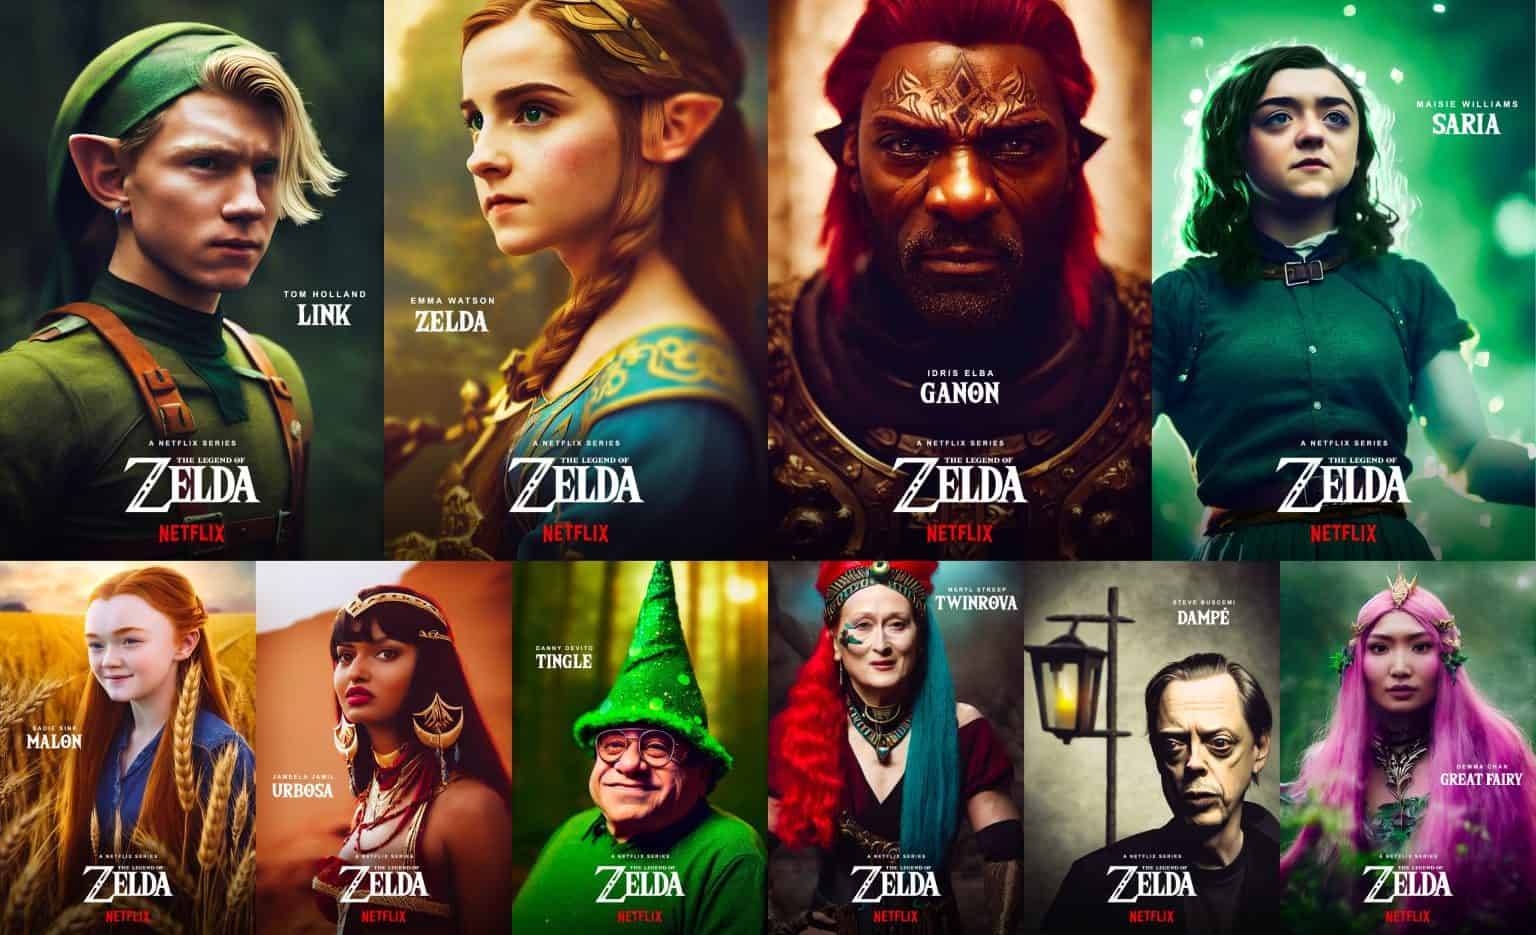 Dan Leveille's Fake Zelda Netflix Posters Are Getting A Lot of